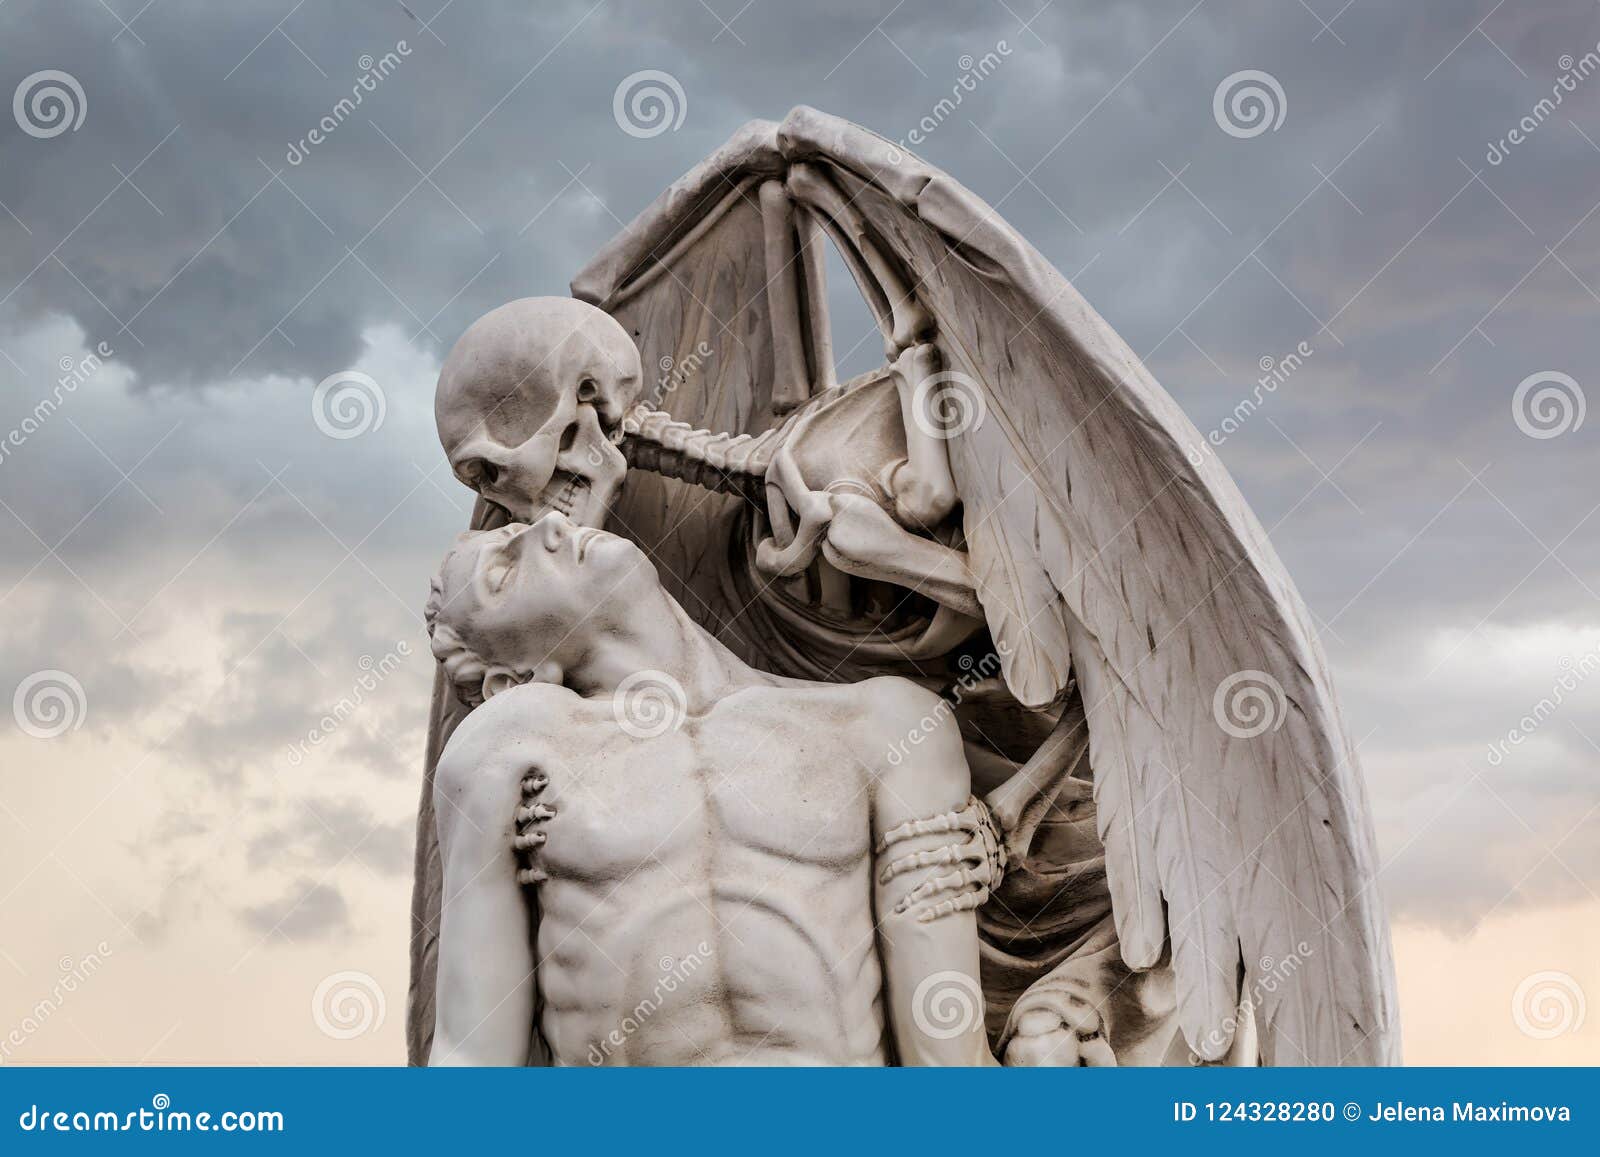 27 Kiss Death Statue Photos Free Royalty Free Stock Photos From Dreamstime